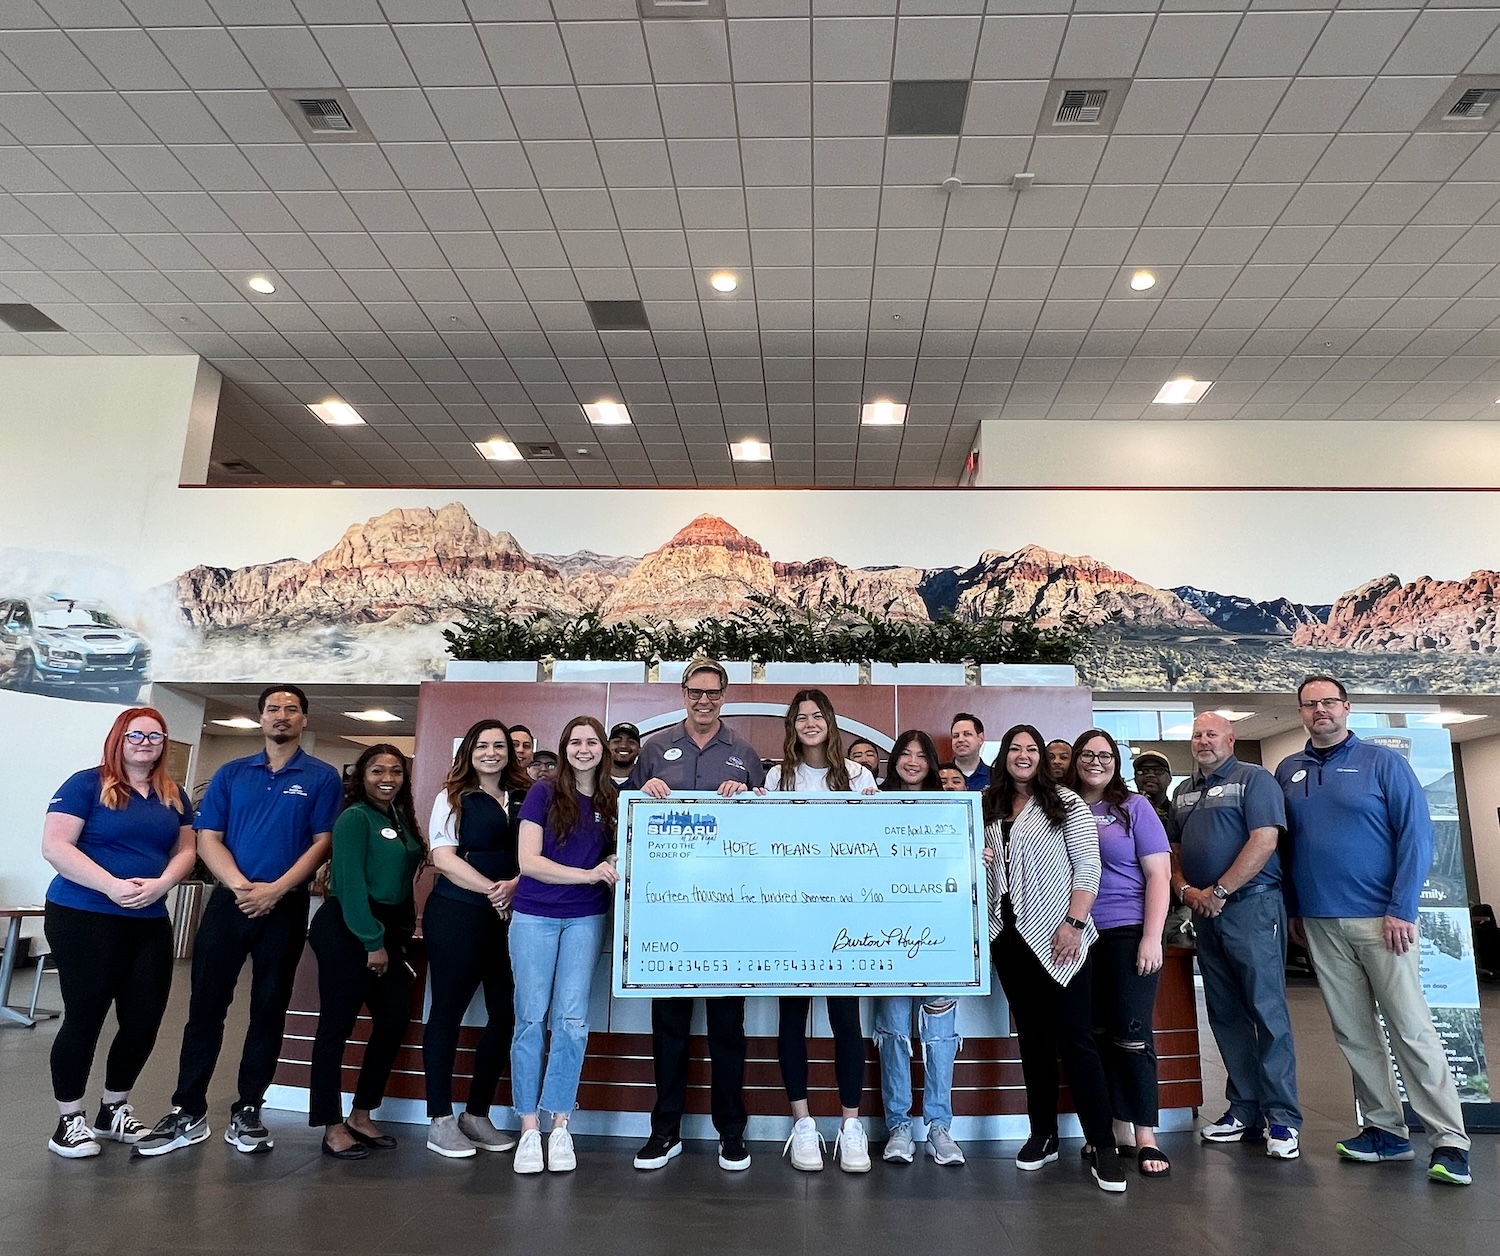 Subaru of Las vegas employees present donation to Hope Means Nevada